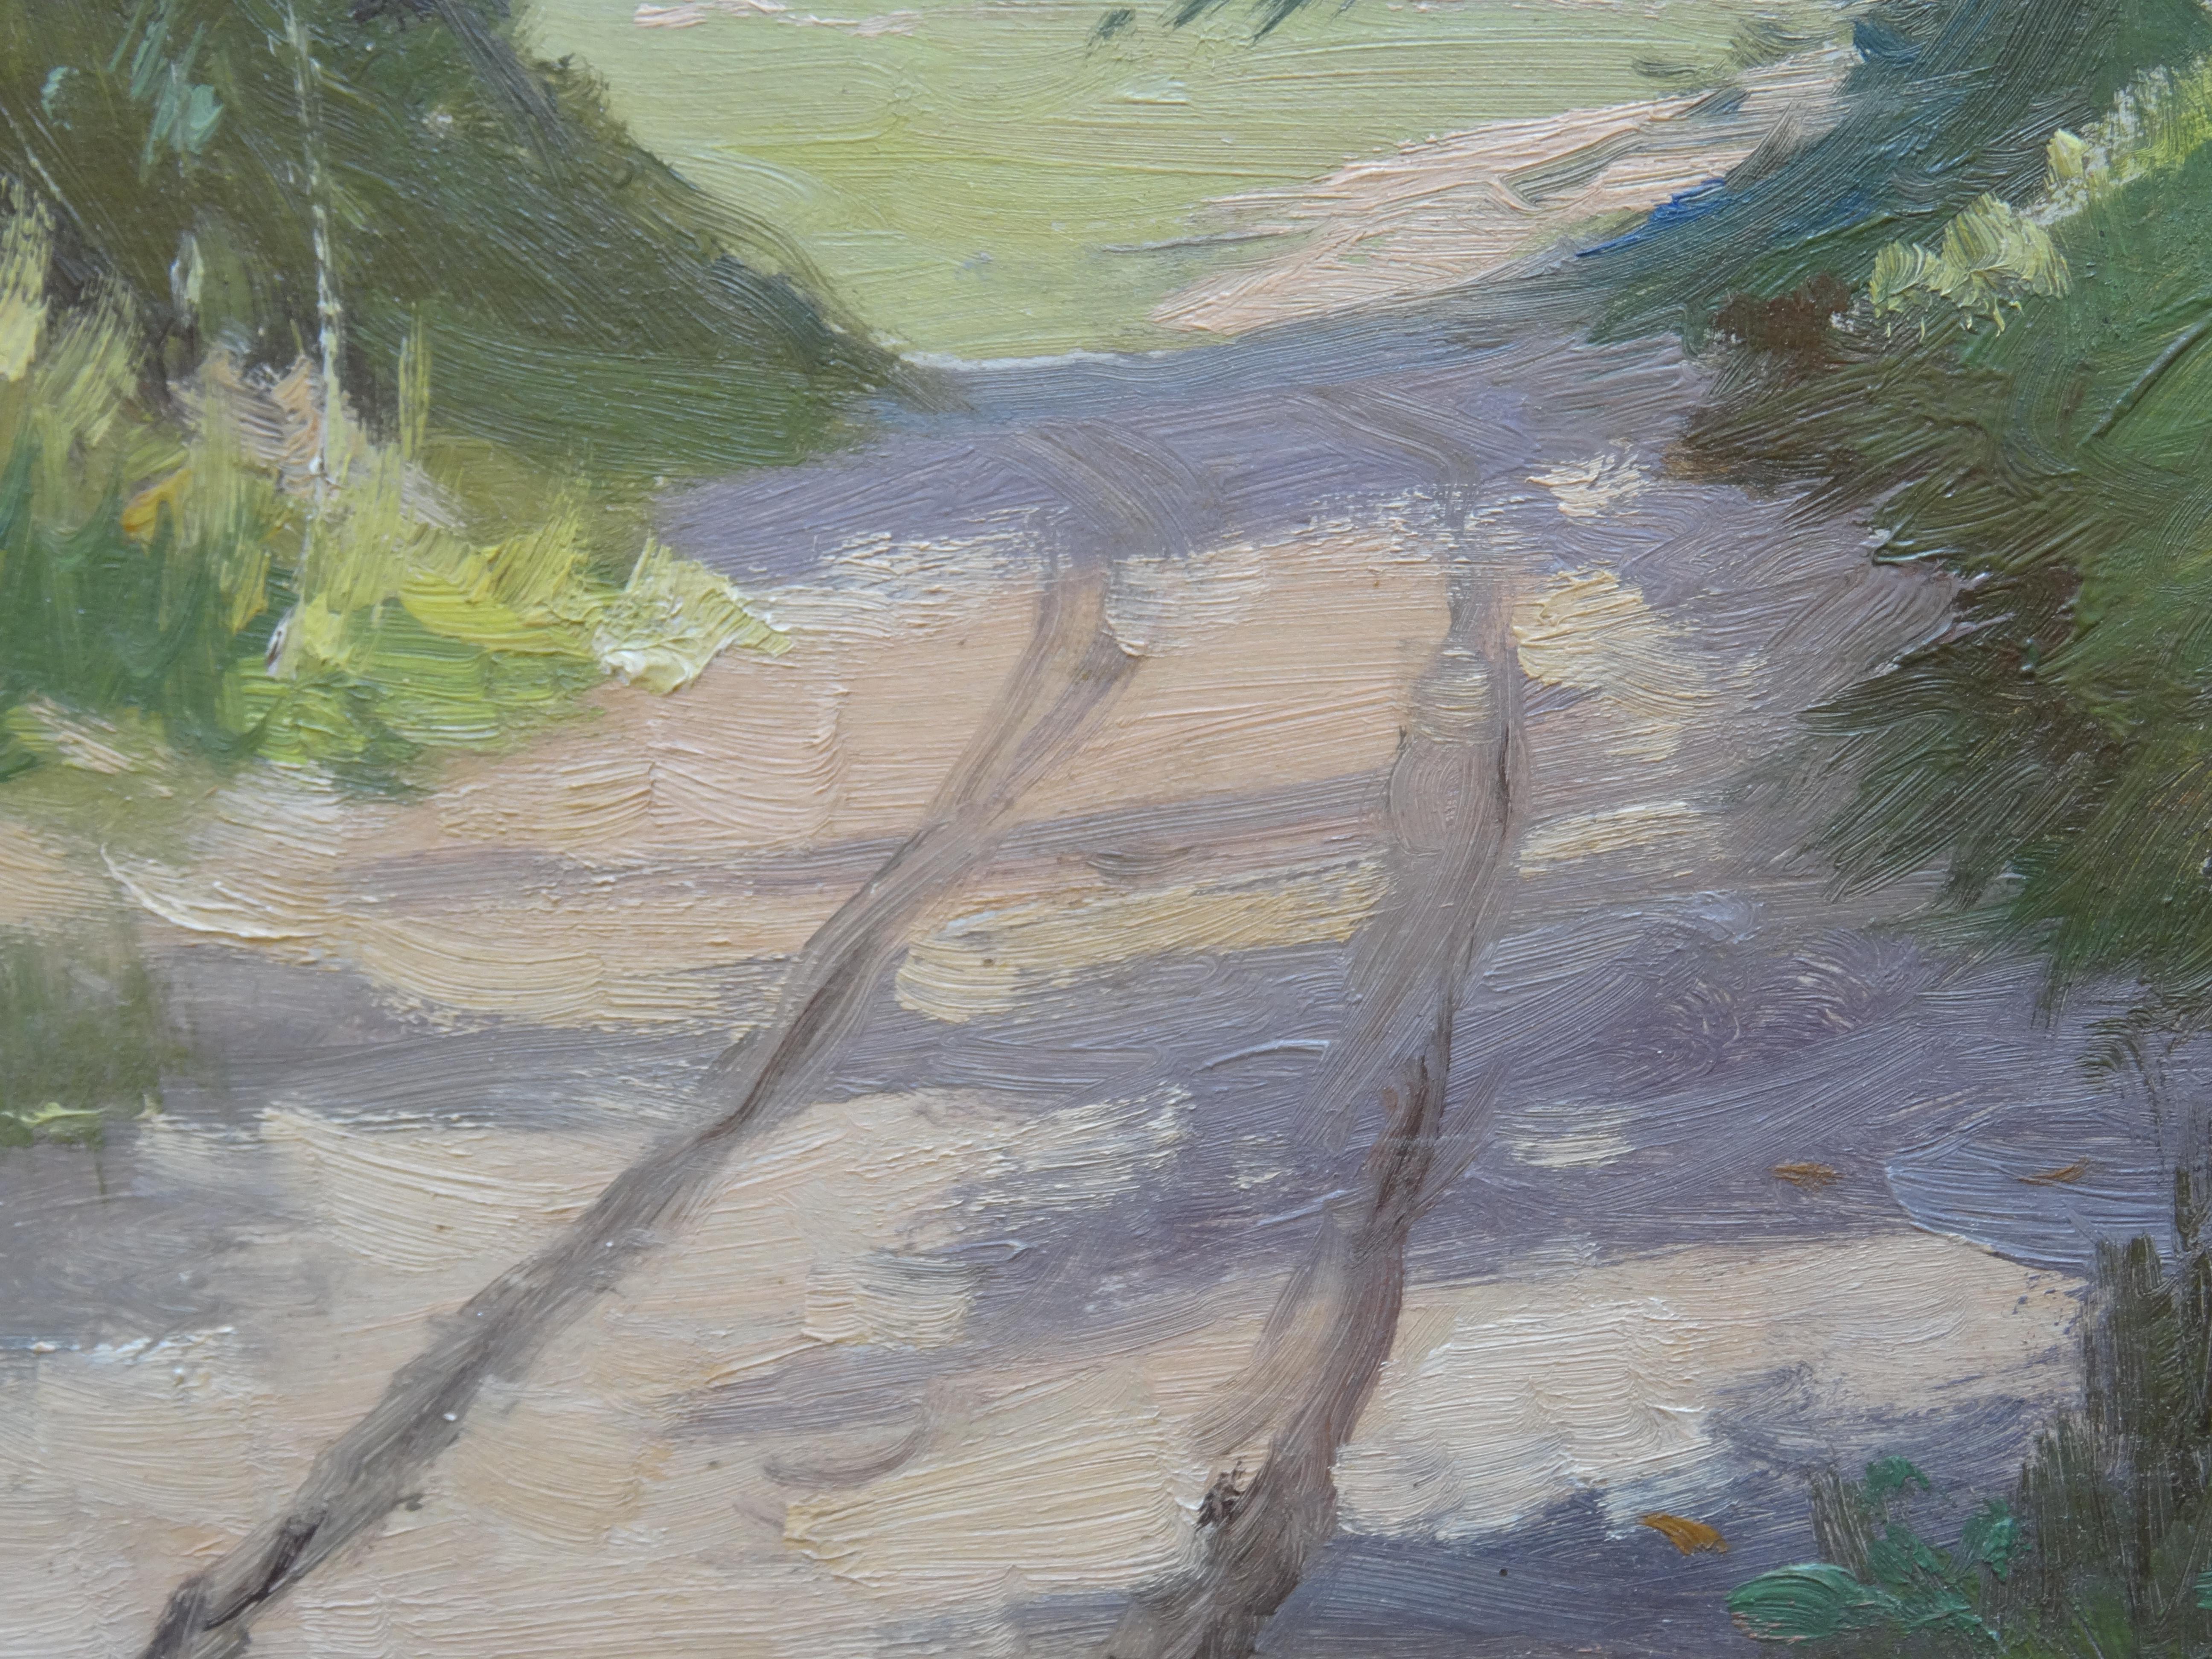 Forest Road. 1956, cardboard, oil, 32.5x44 cm - Painting by Edgars Vinters